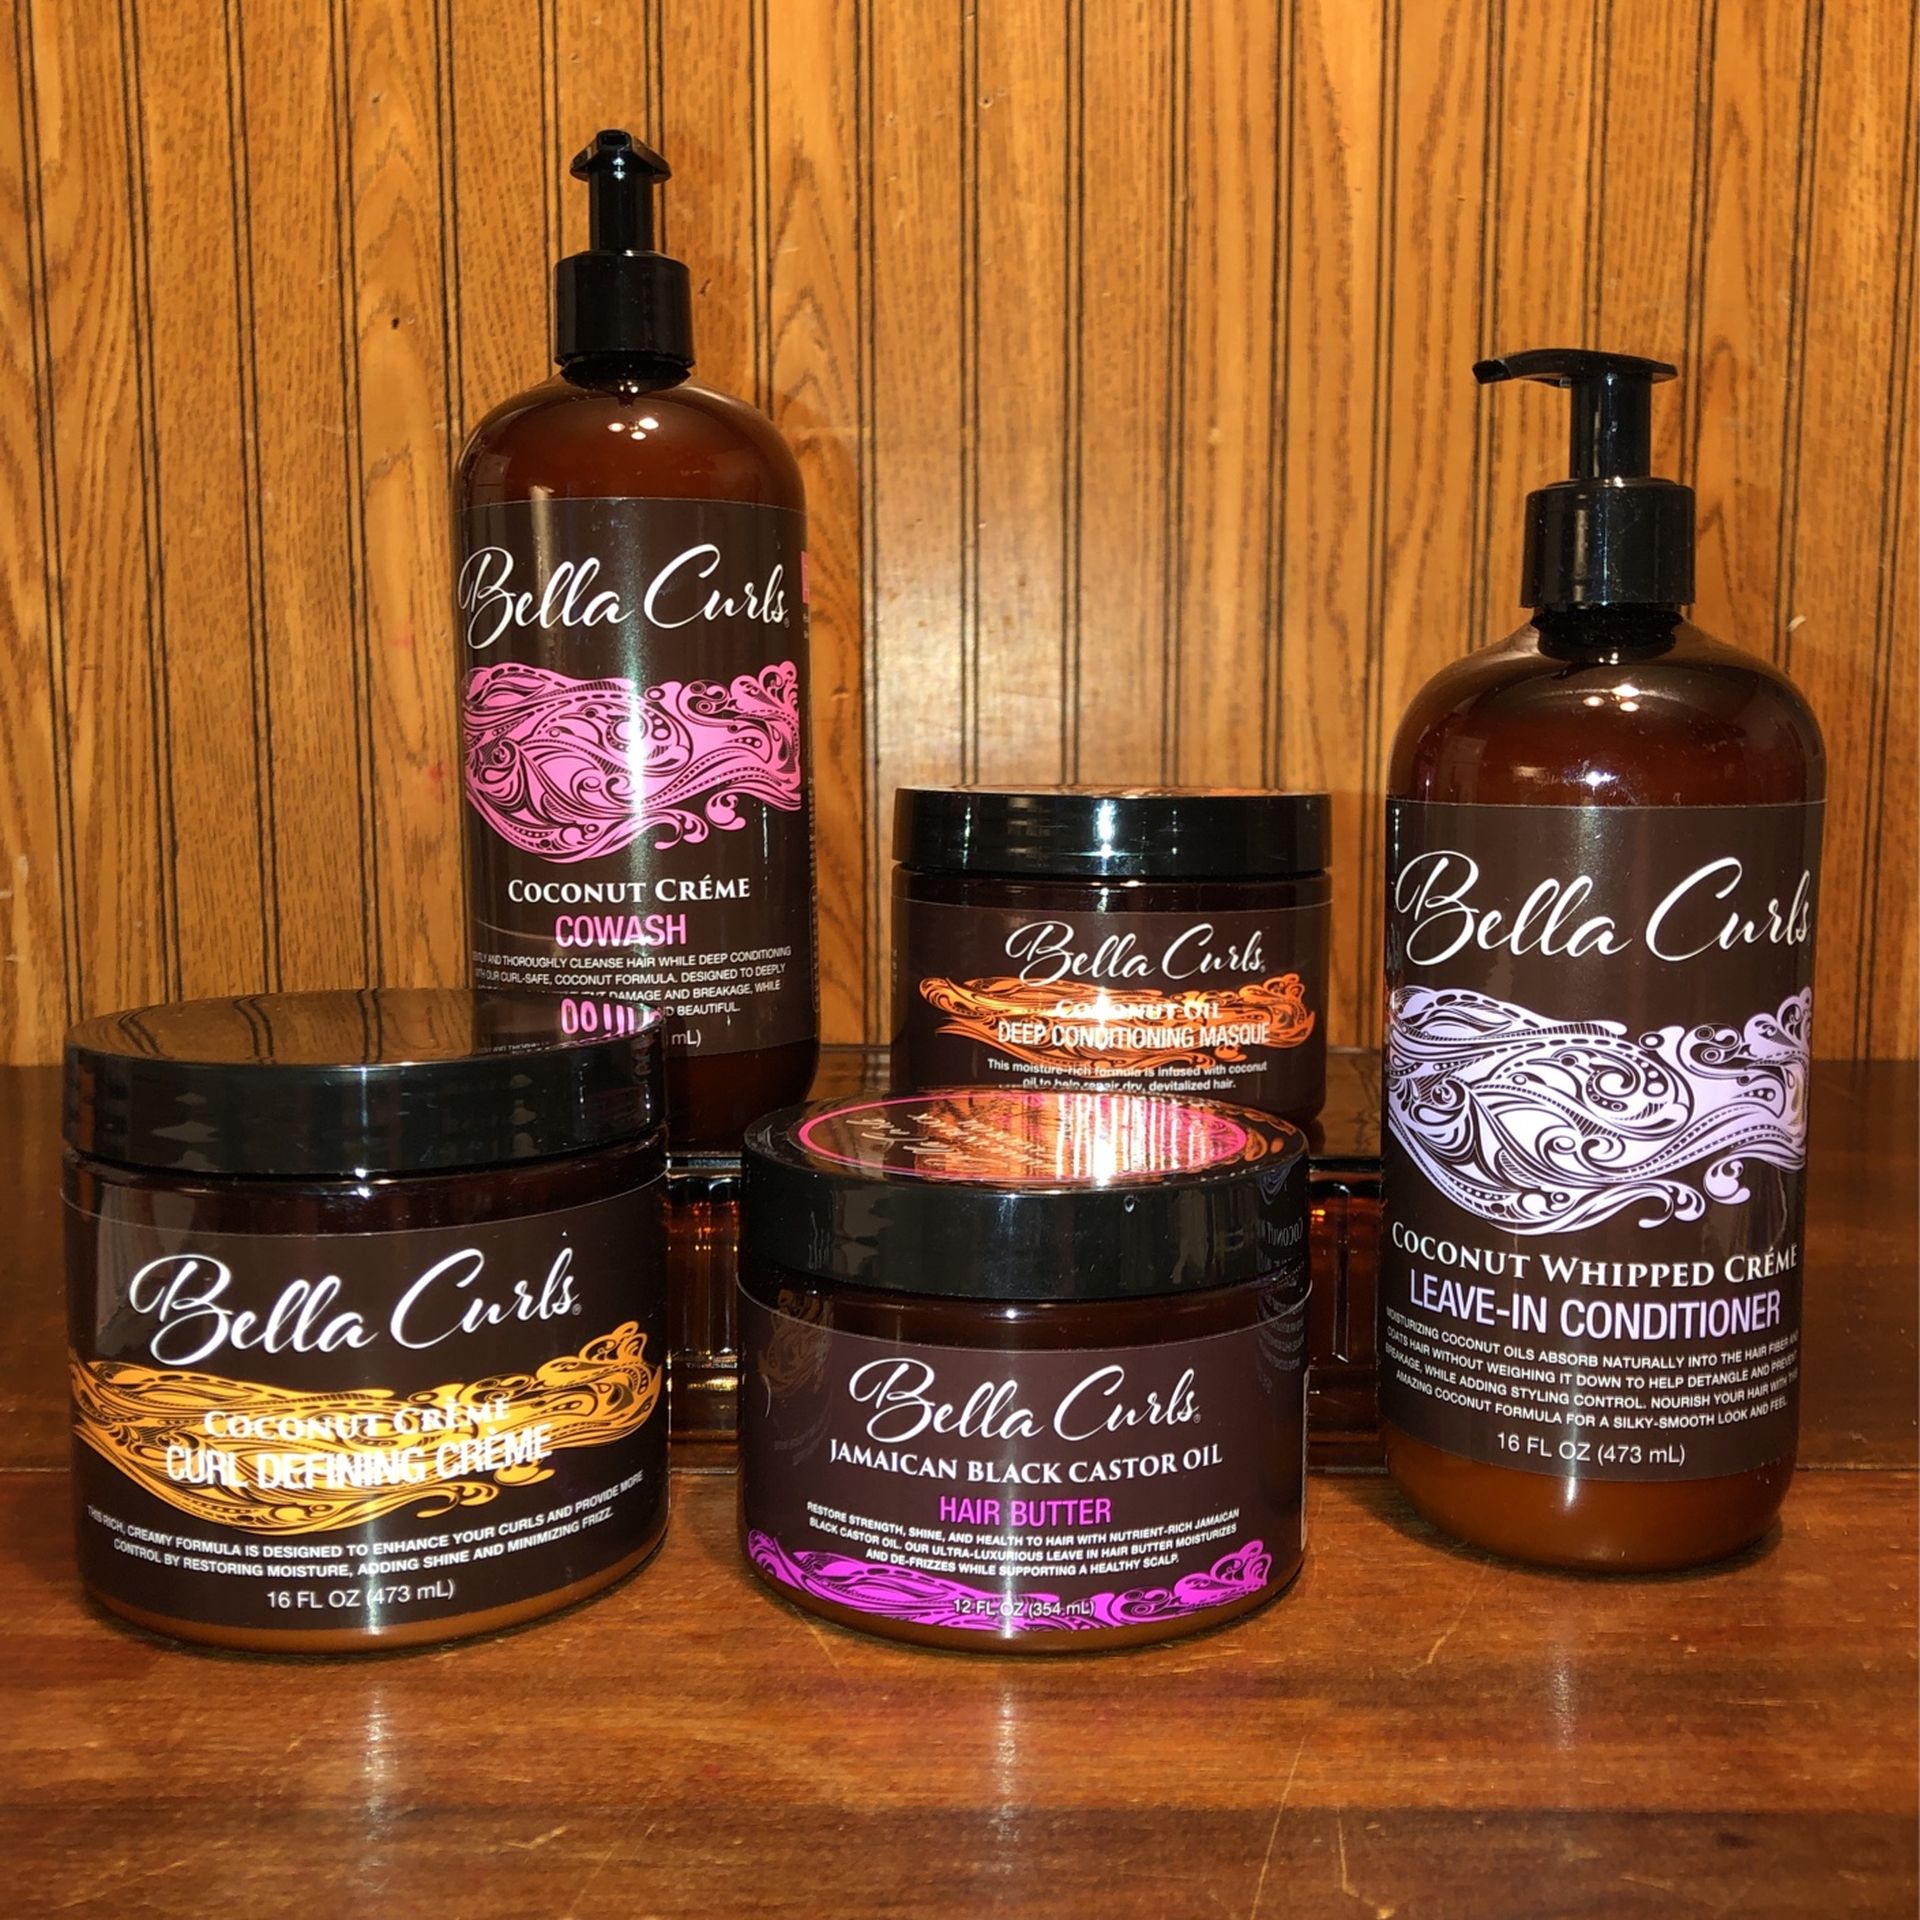 All Brand NEW! 🎆 Bella Curls - Hair Care Products (((PENDING PICK UP TODAY 4-5pm)))